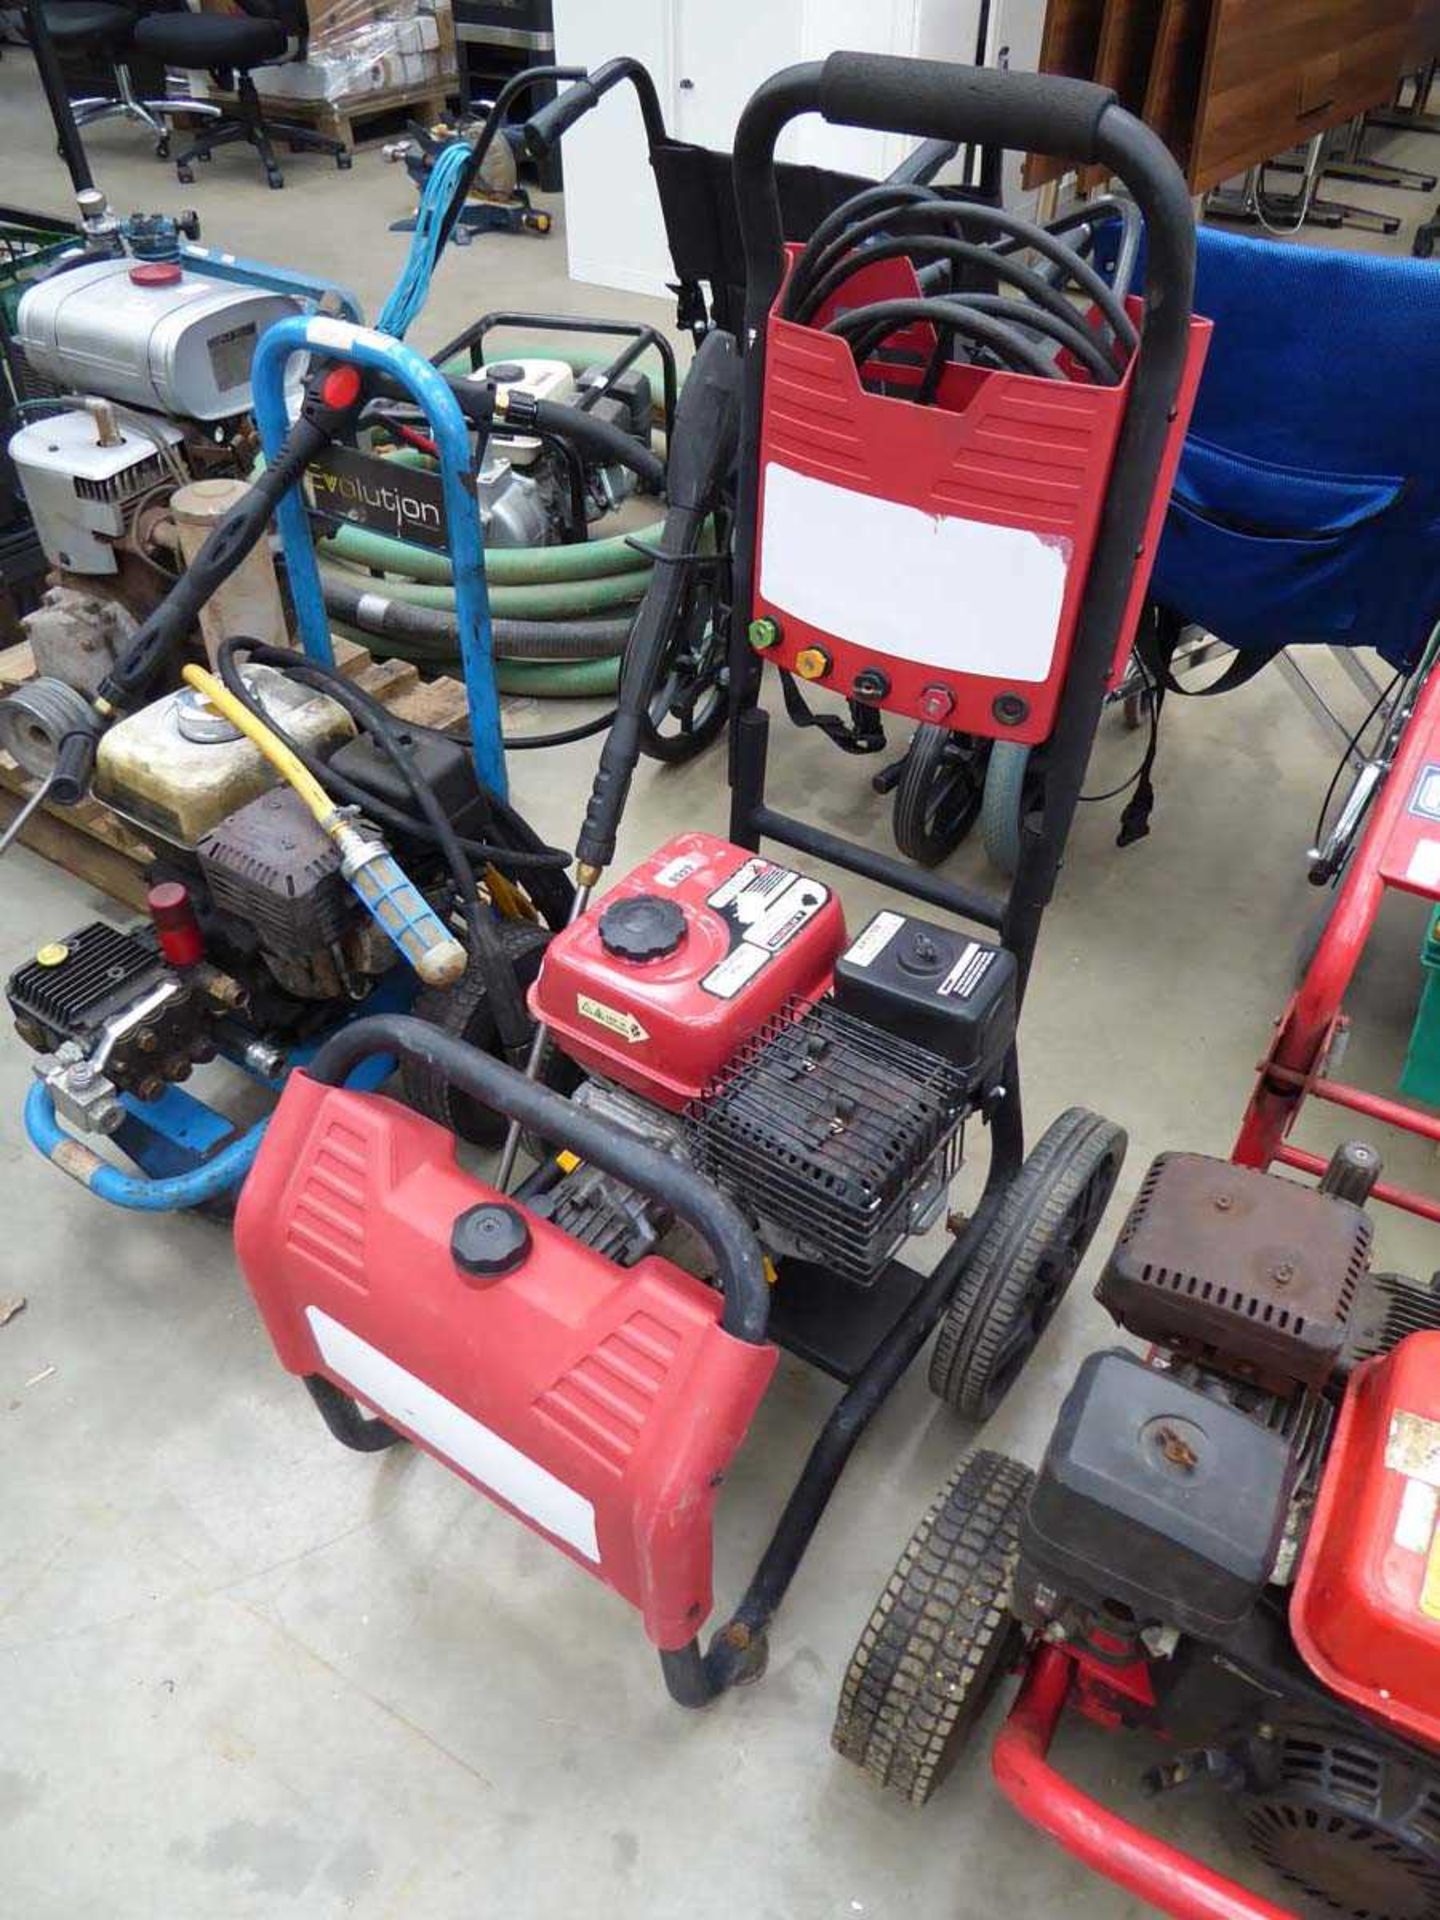 Red petrol powered pressure washer (no hose and lance)